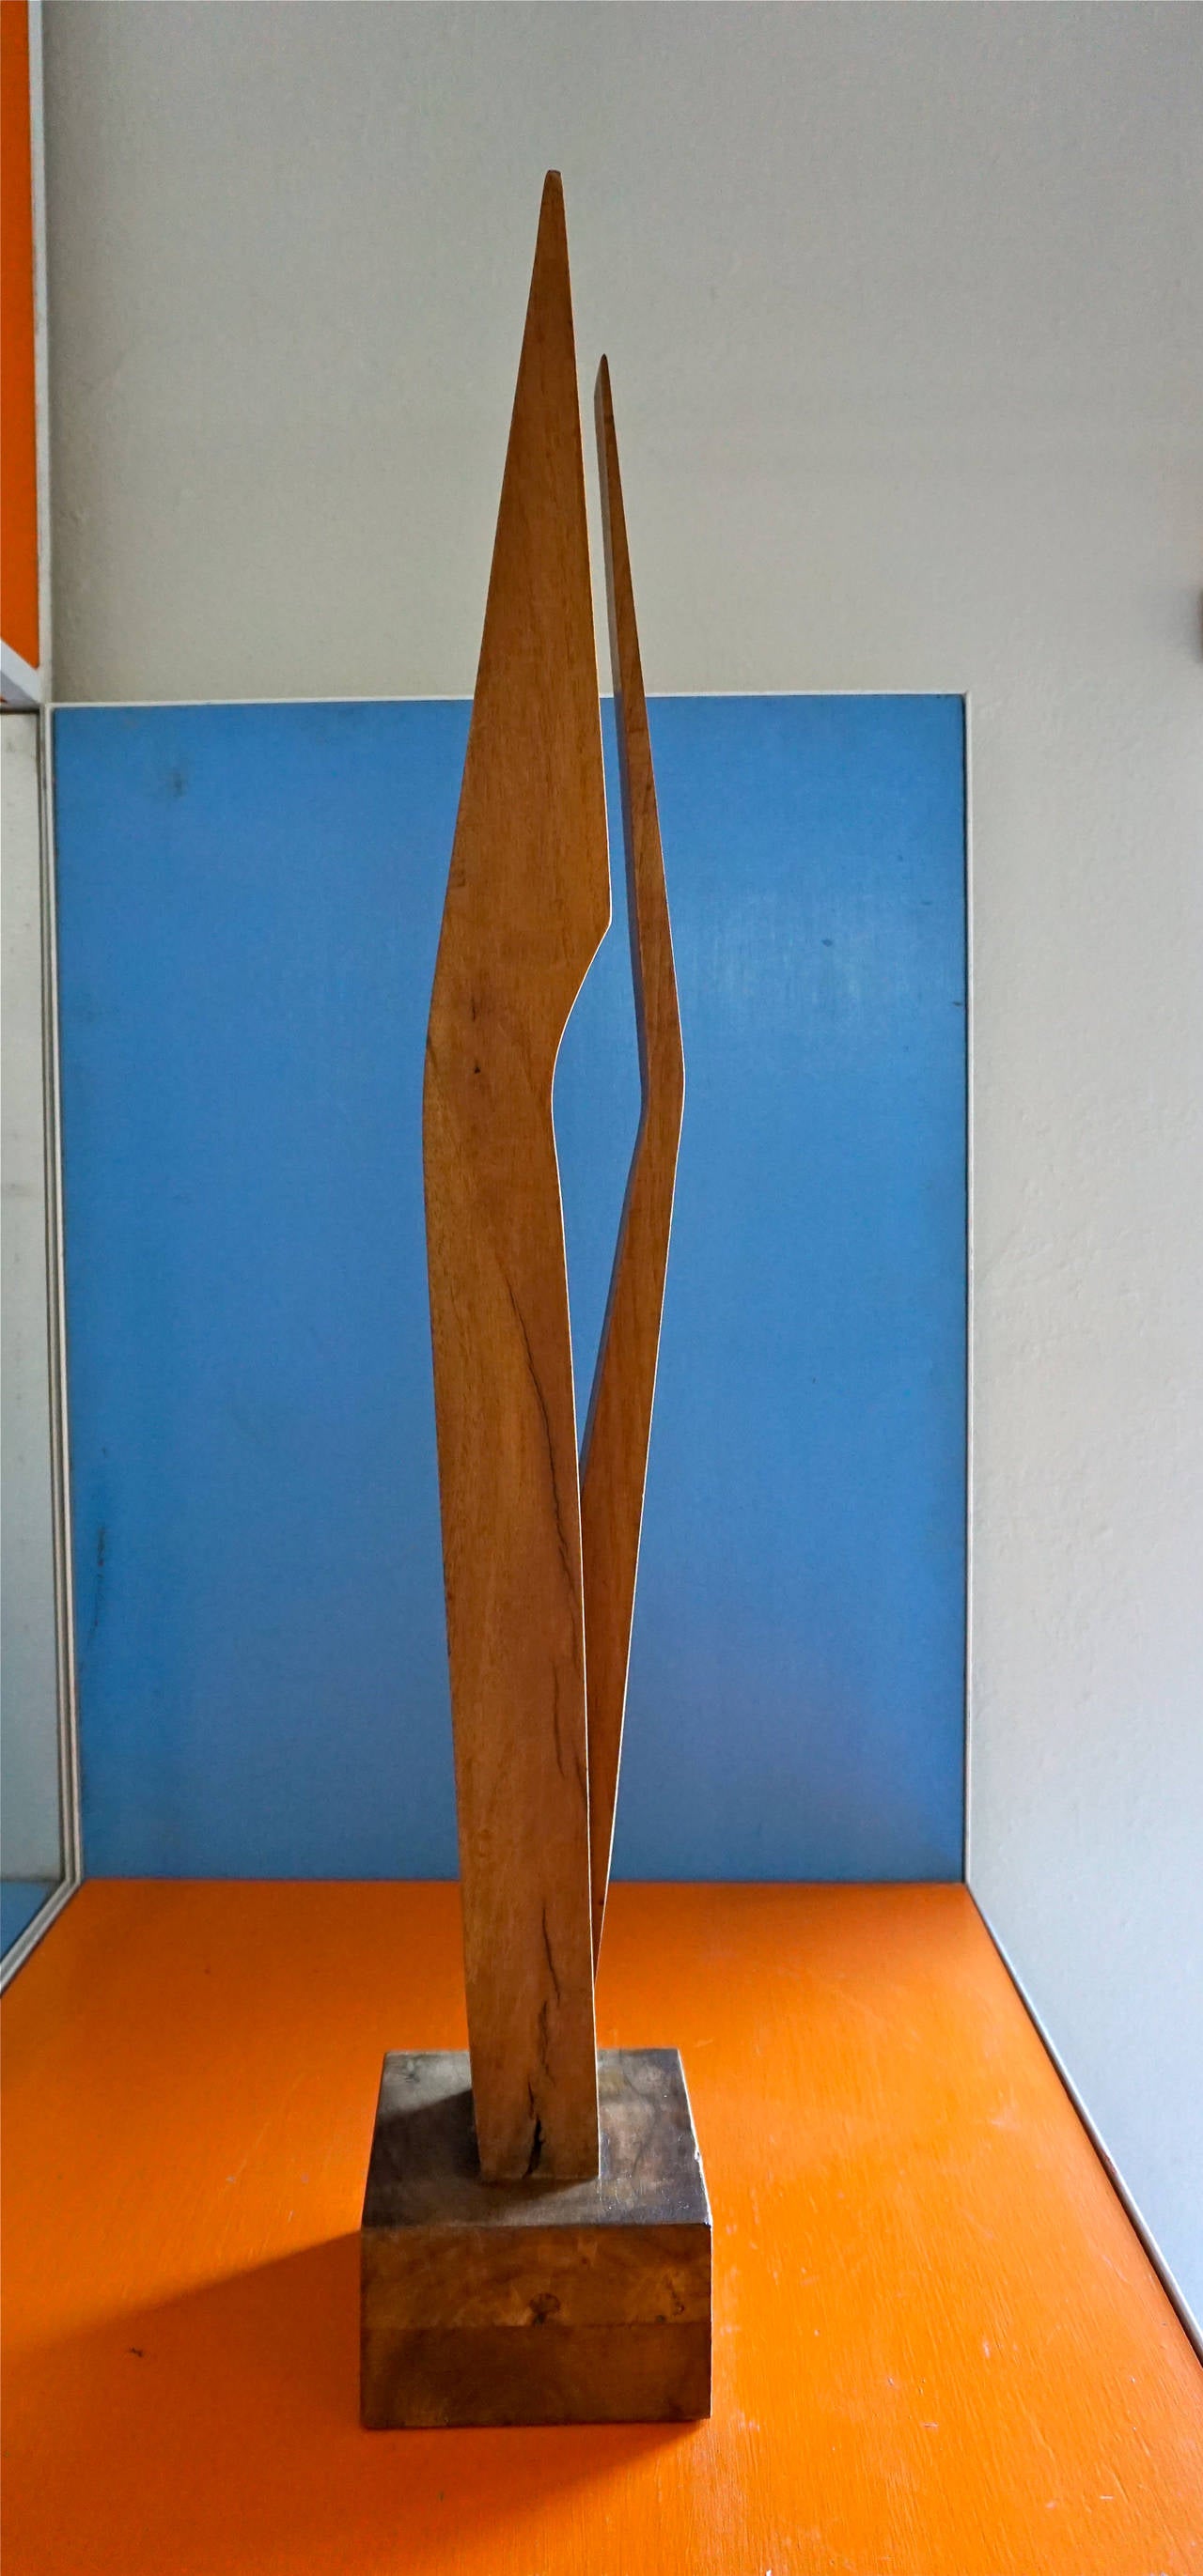 Well known in California for her wood assemblages as doors and sculptures, this is one of her most minimal of pieces. Unsigned but accompanied by a letter of authenticity by a friend of Hutchinson's who acquired it directly from the artist.